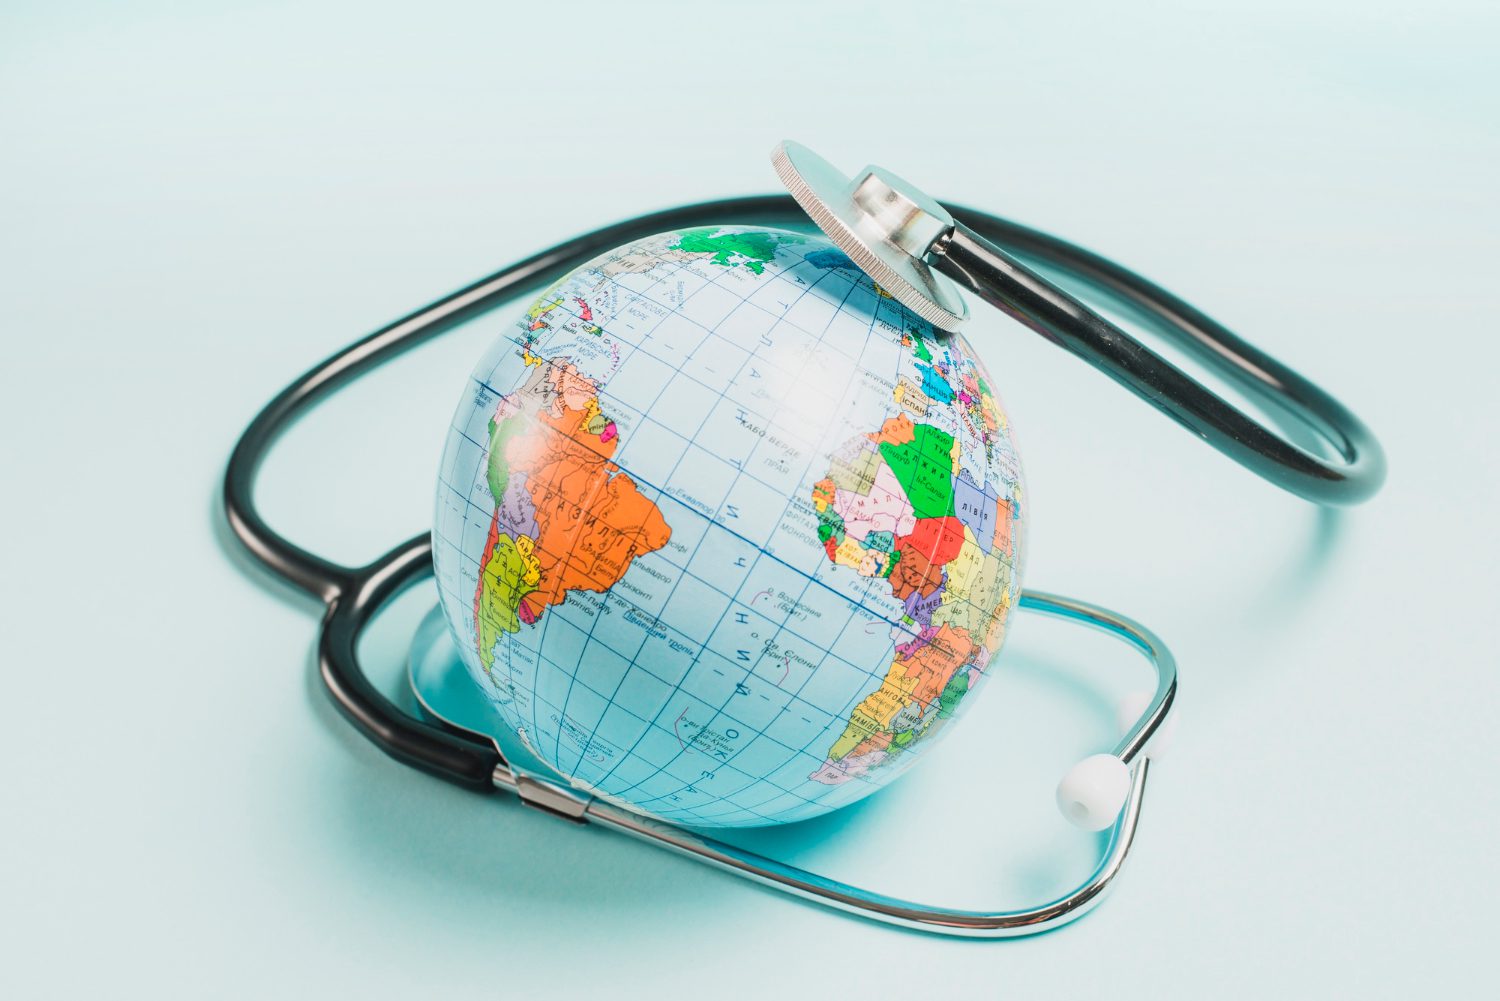 More than 8 thousand medical tourists are expected to visit Kazakhstan